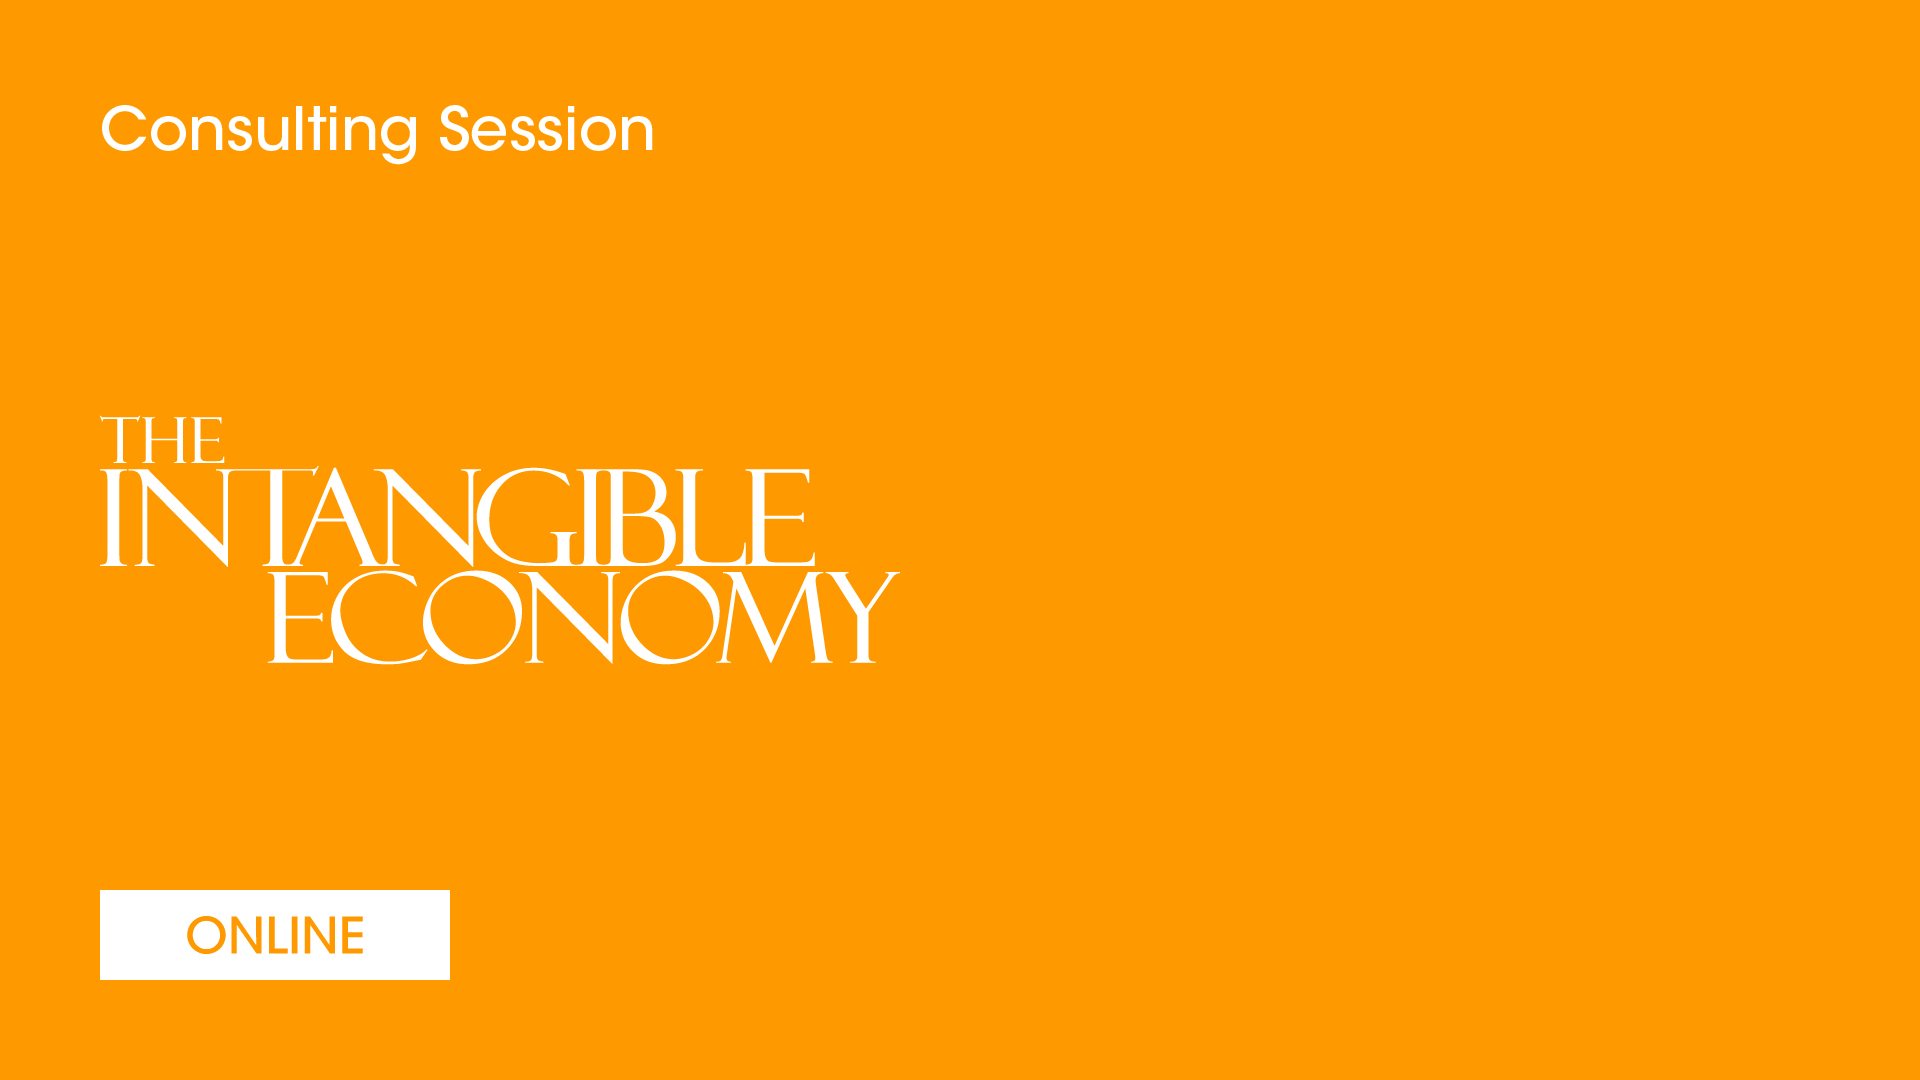 The Intangible Economy - Consulting Session